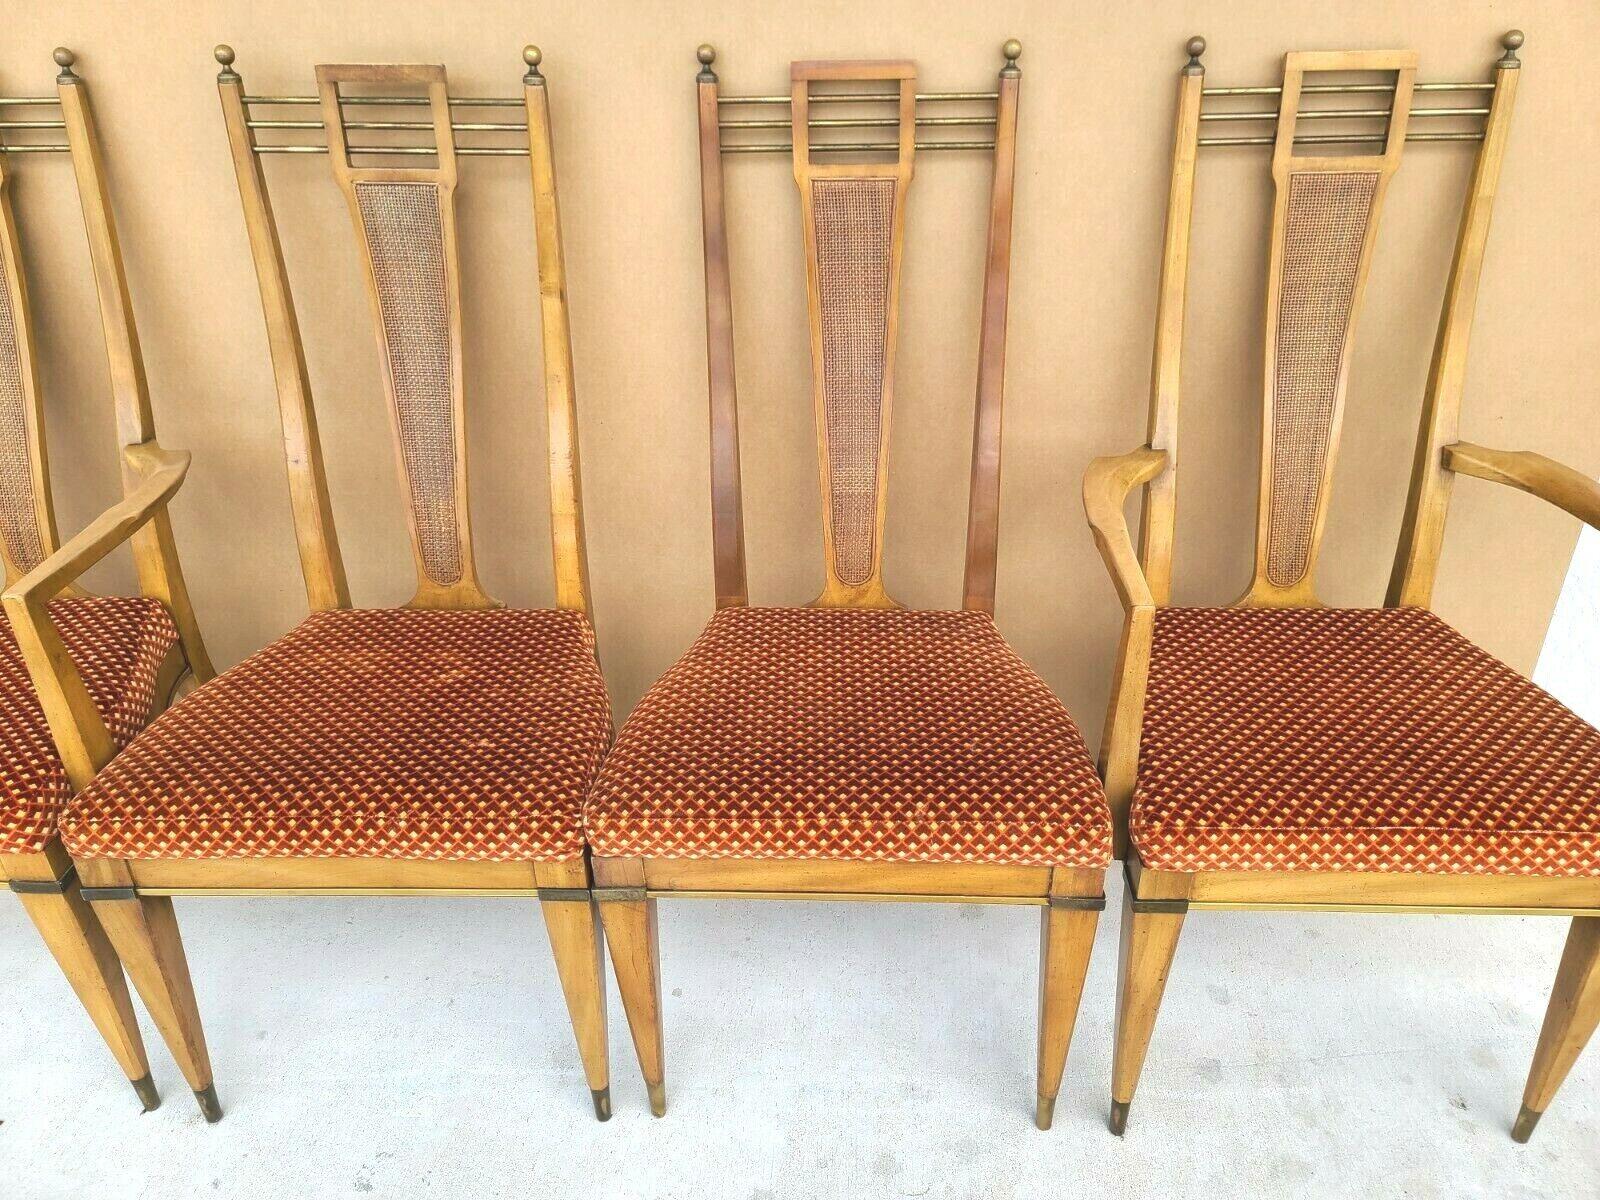 MCM J L Metz Brass Solid Wood & Cane Dining Chairs Set of 4 In Good Condition For Sale In Lake Worth, FL